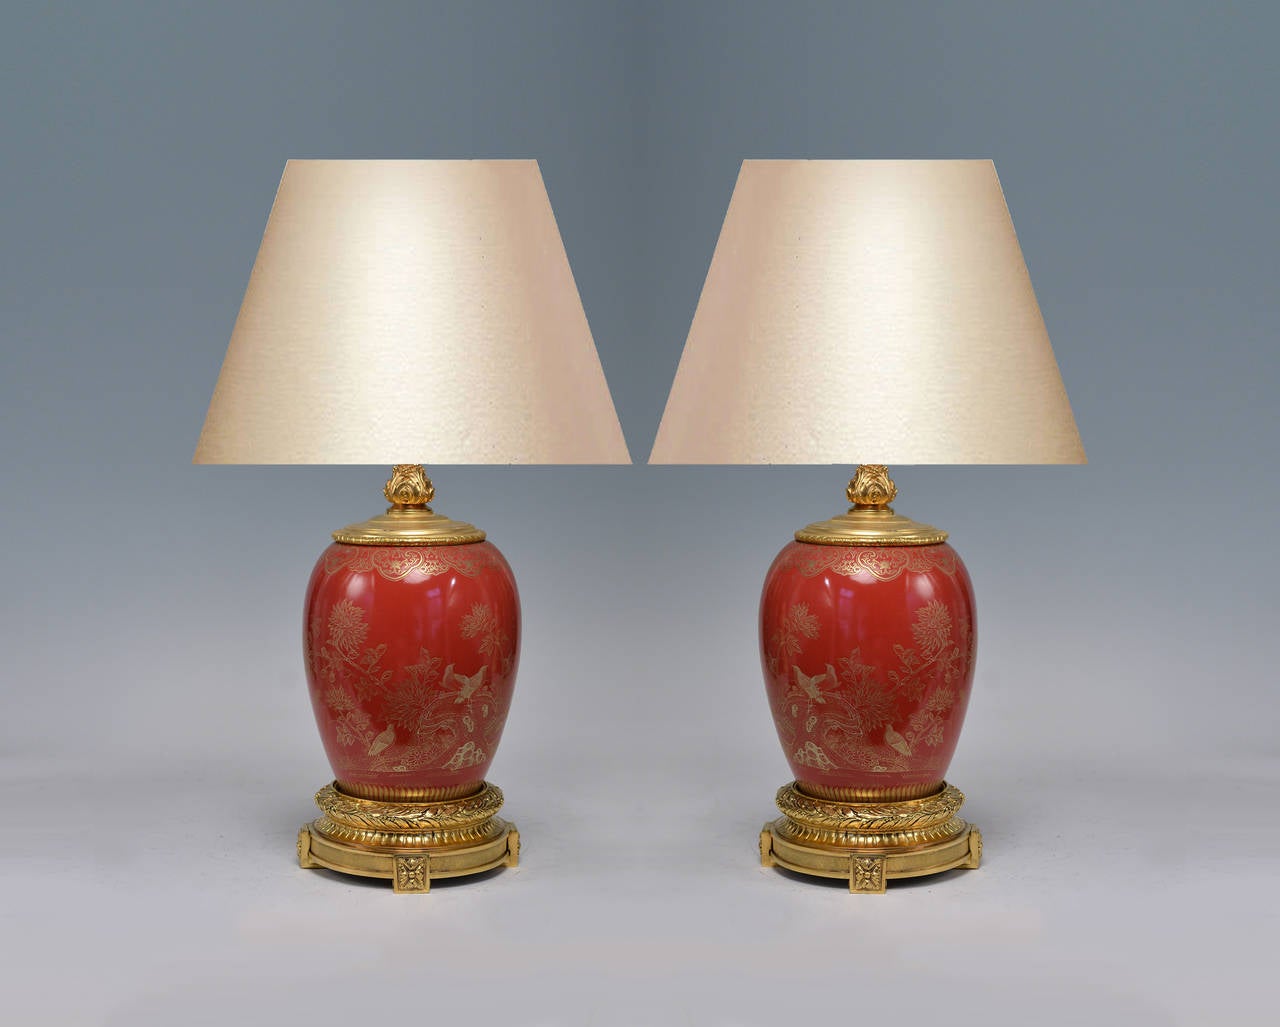 Pair of ormolu-mounted red porcelain lamps with fine painted flower blossom and birds decoration.
(Lampshade not included).